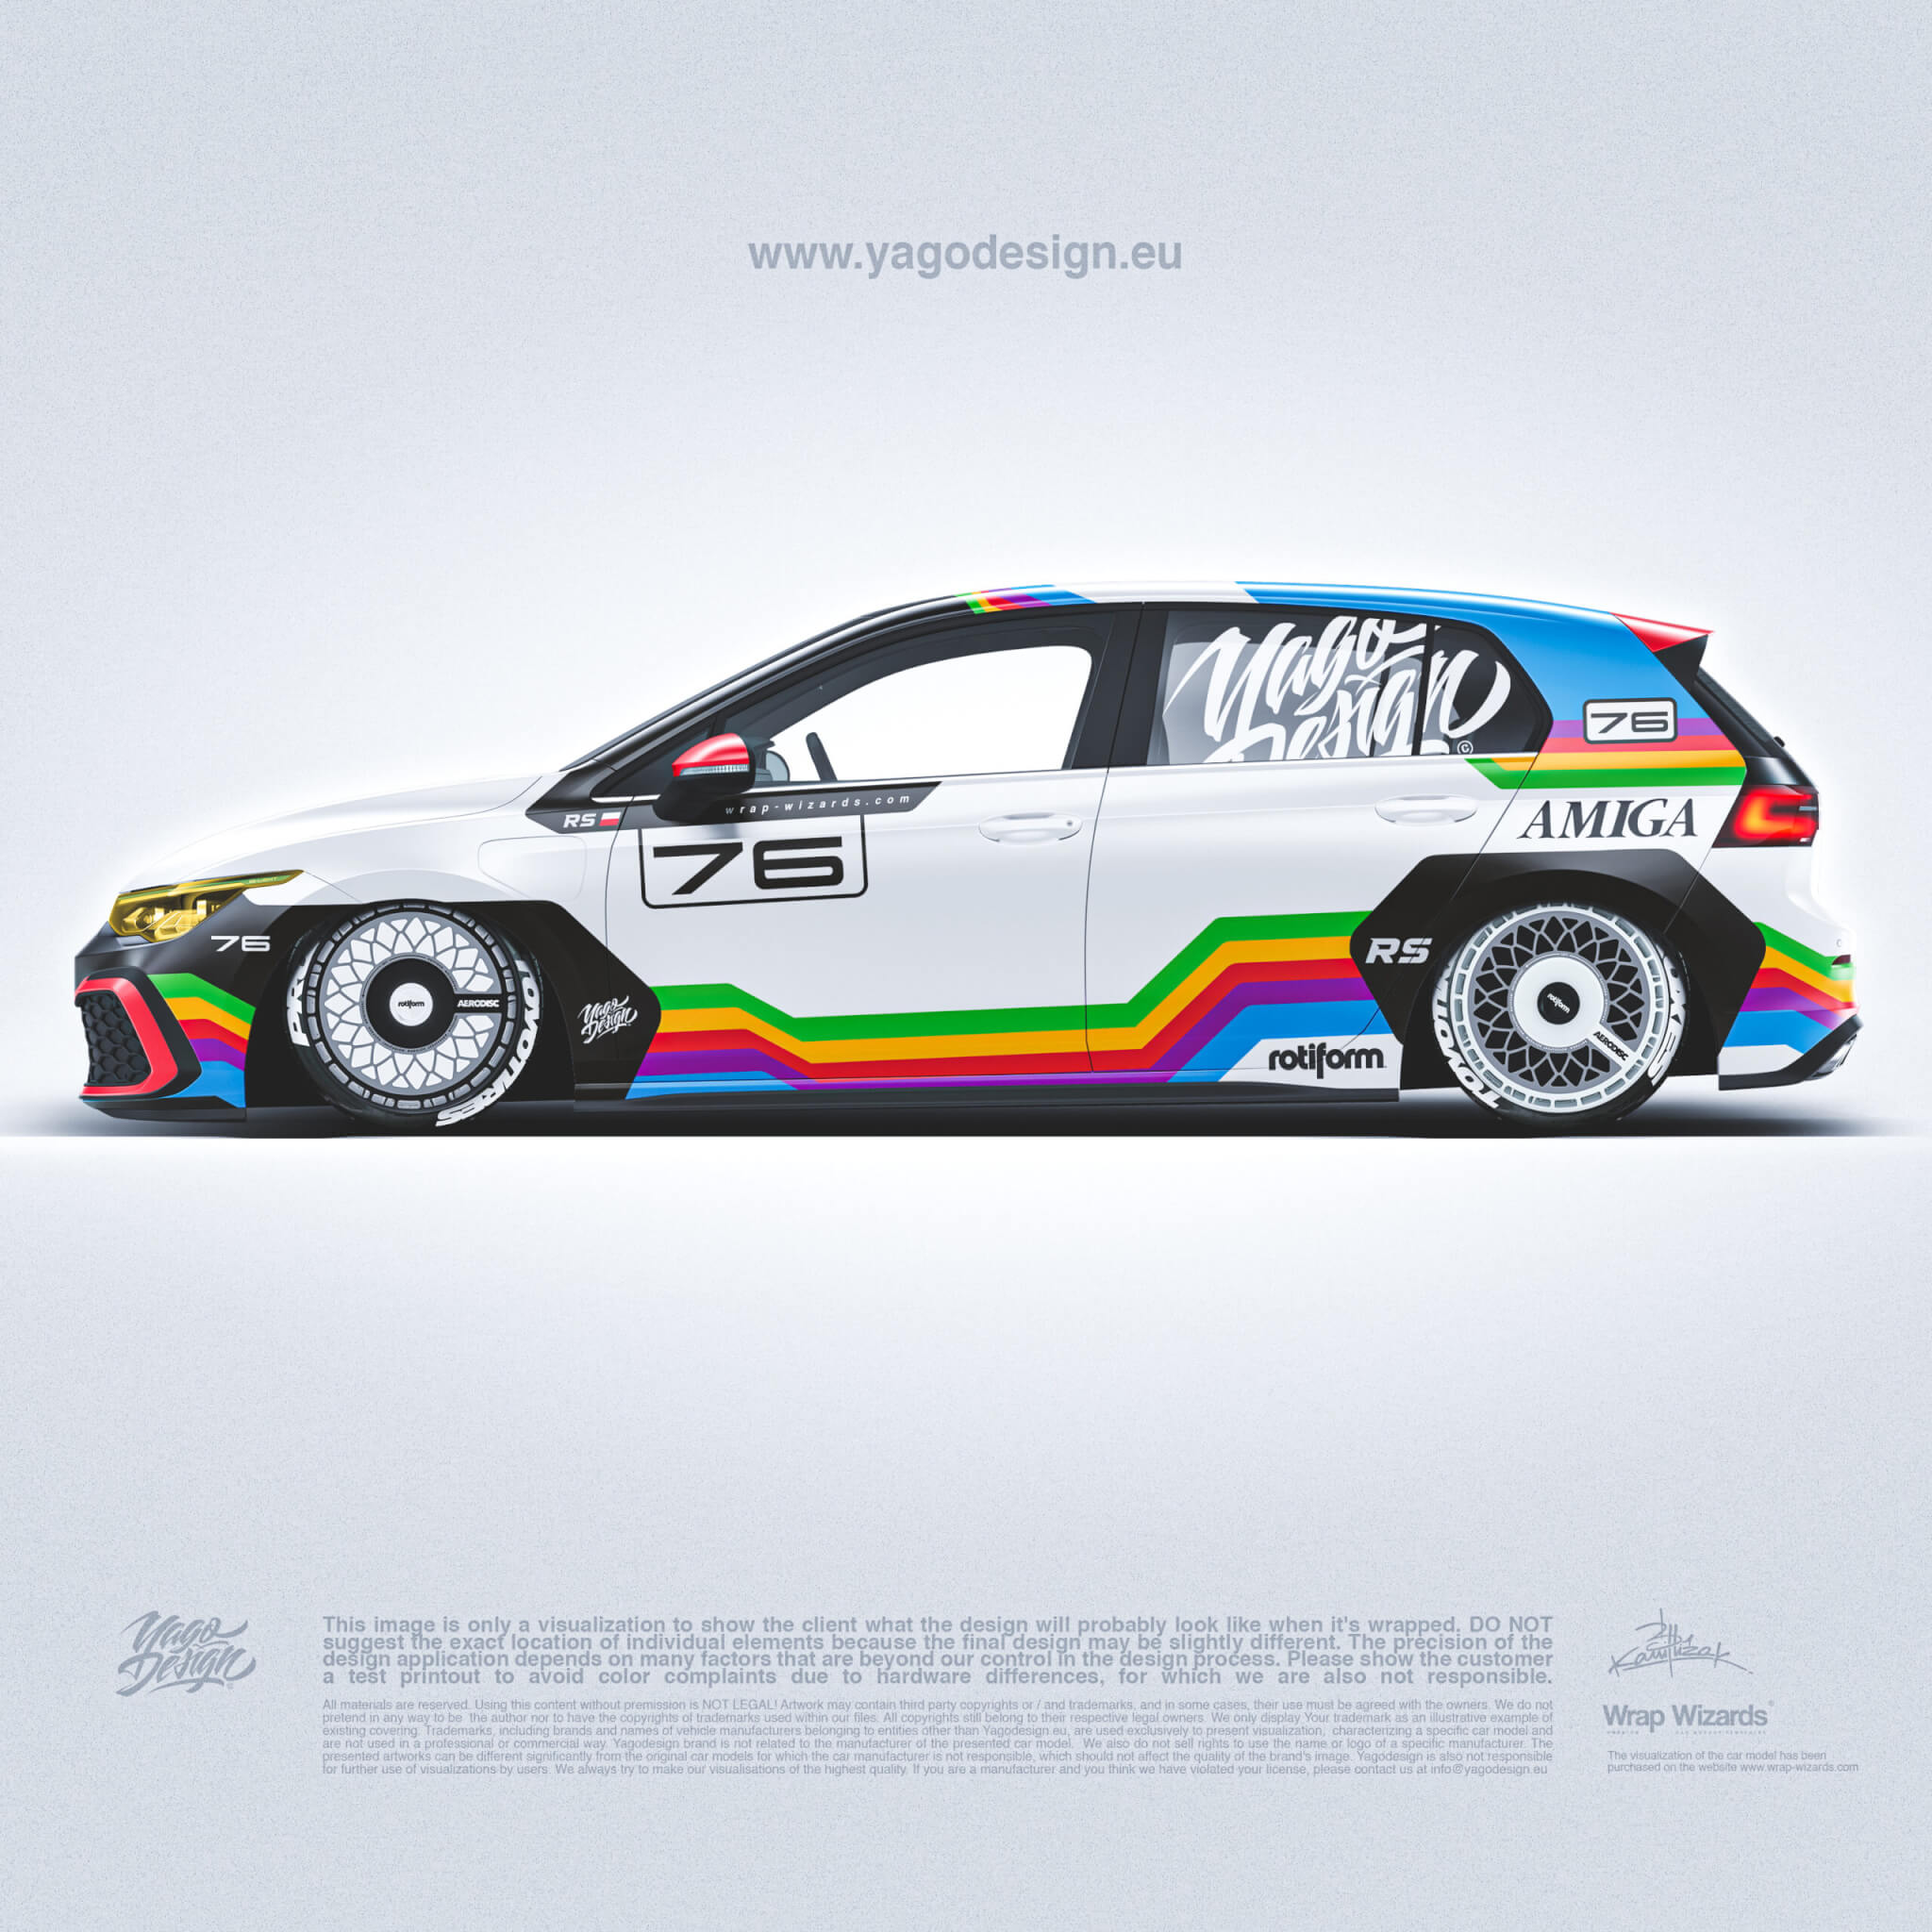 VOLKSWAGEN GOLF AMIGA SIDE AND TOP BY YAGODESIGN hero image